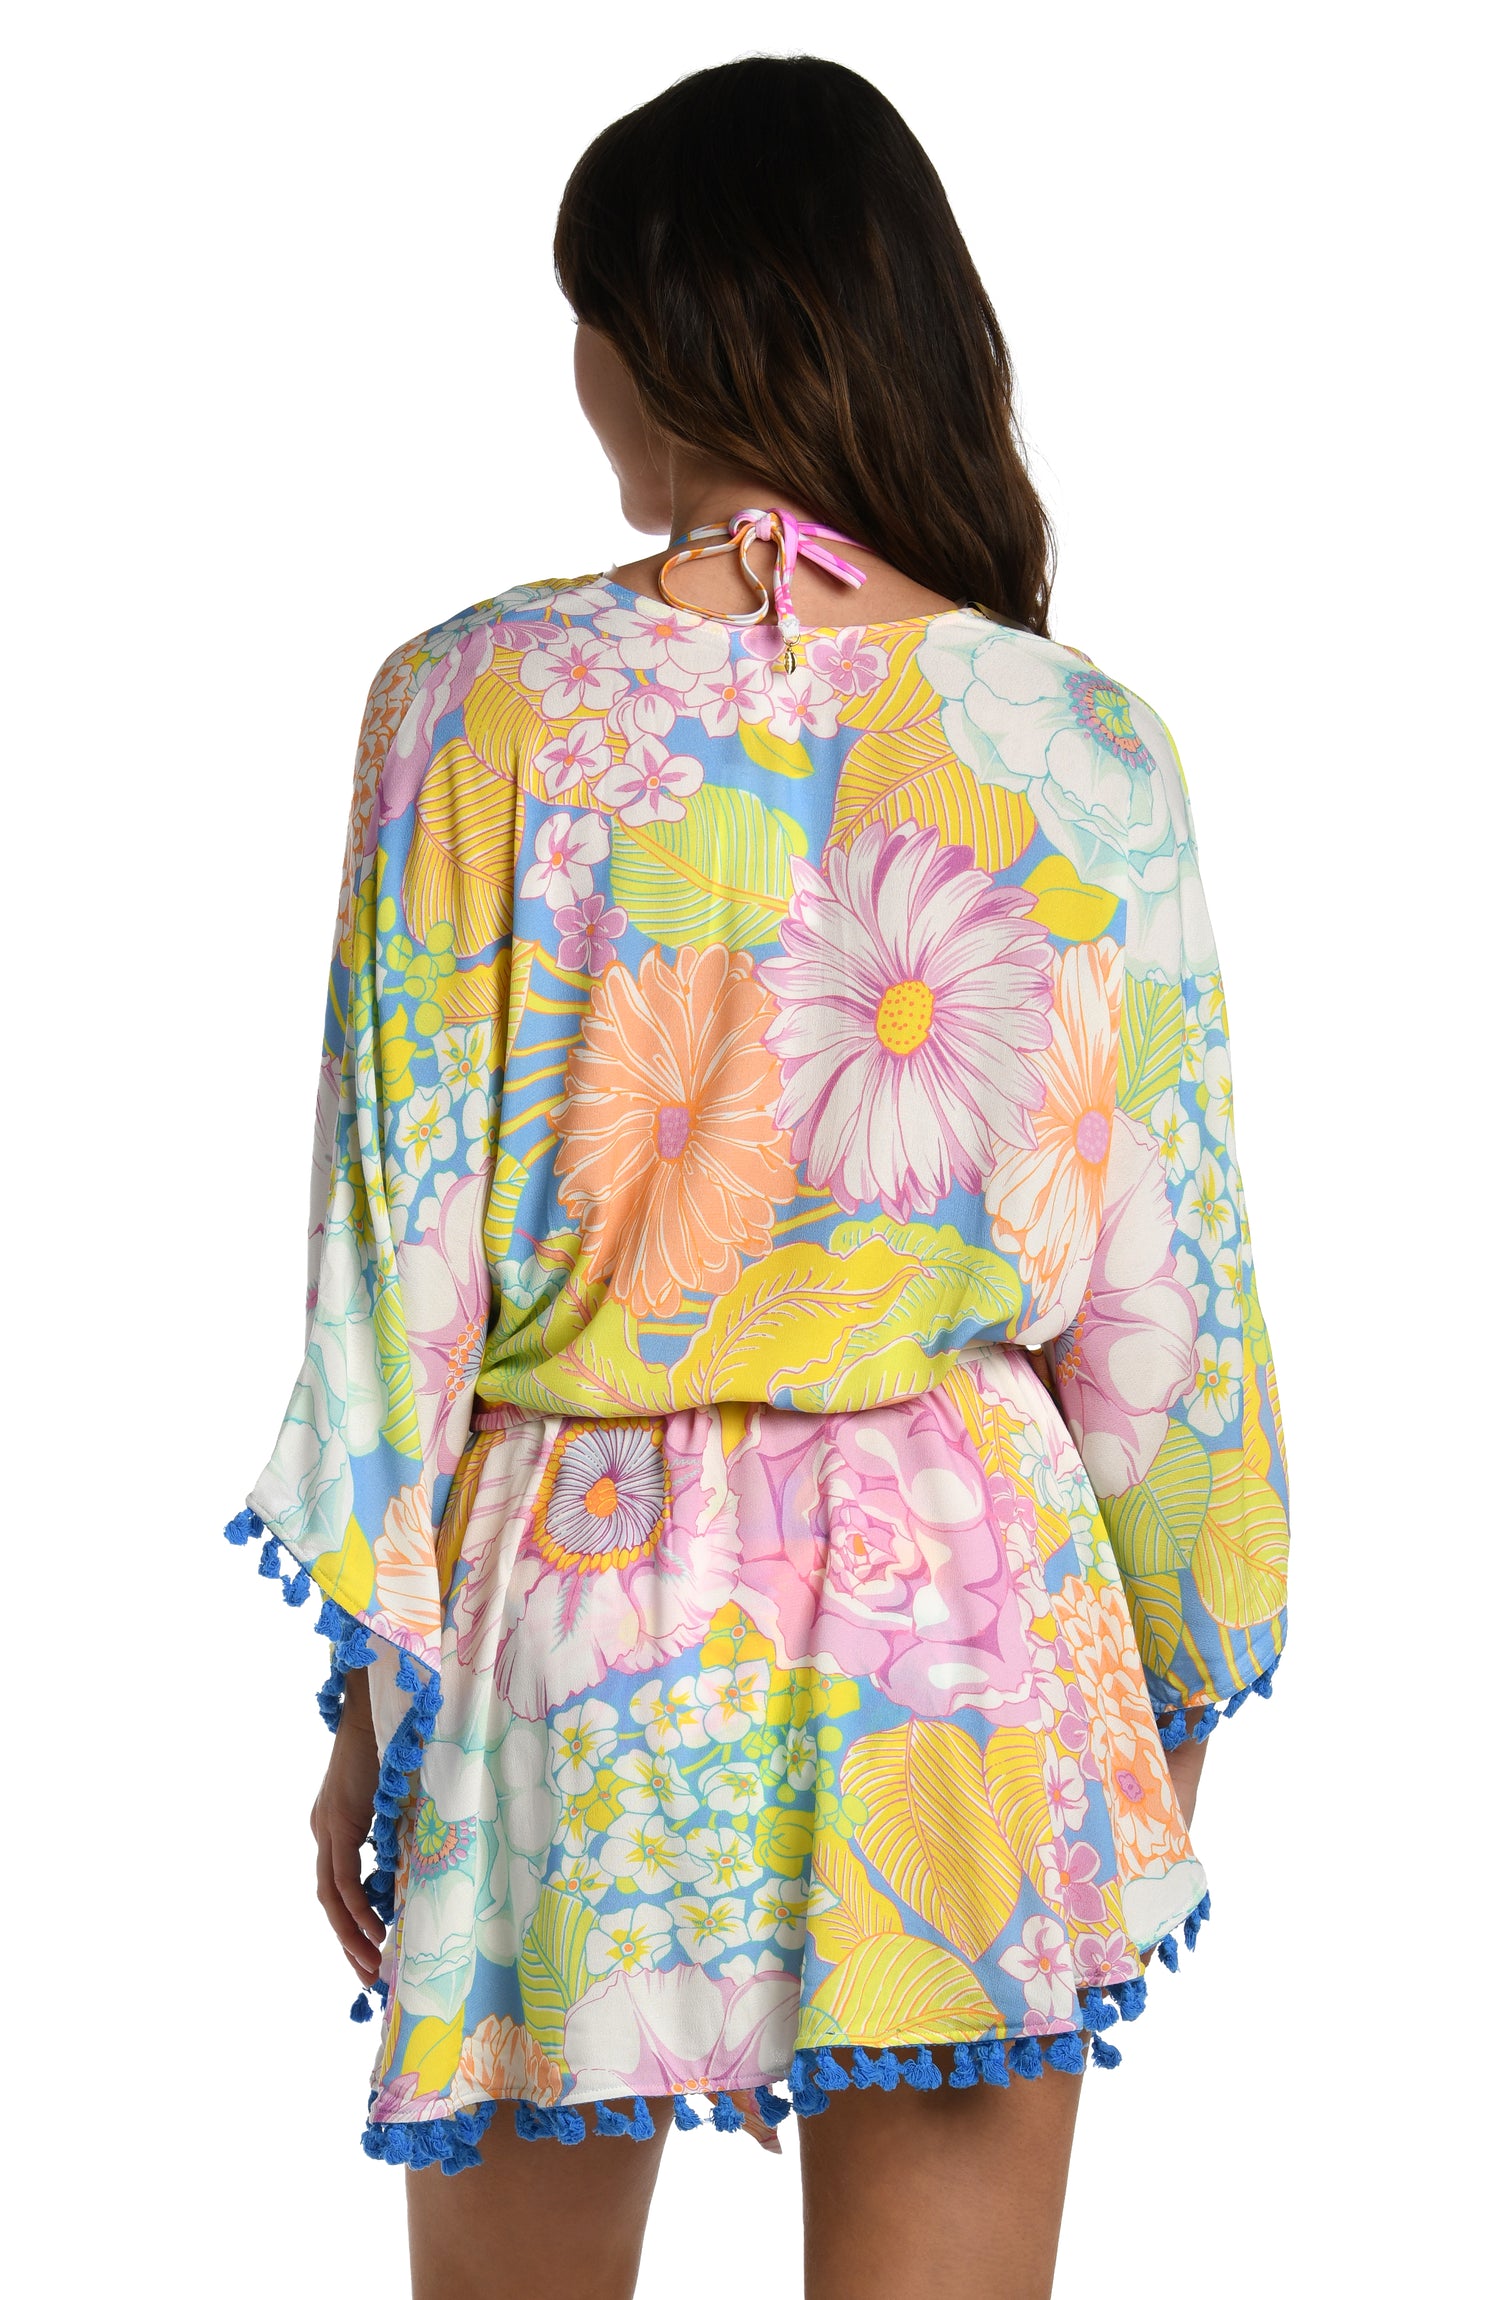 Model is wearing a light pastel multicolored floral printed kimono cover up from our Botanical Bliss collection.